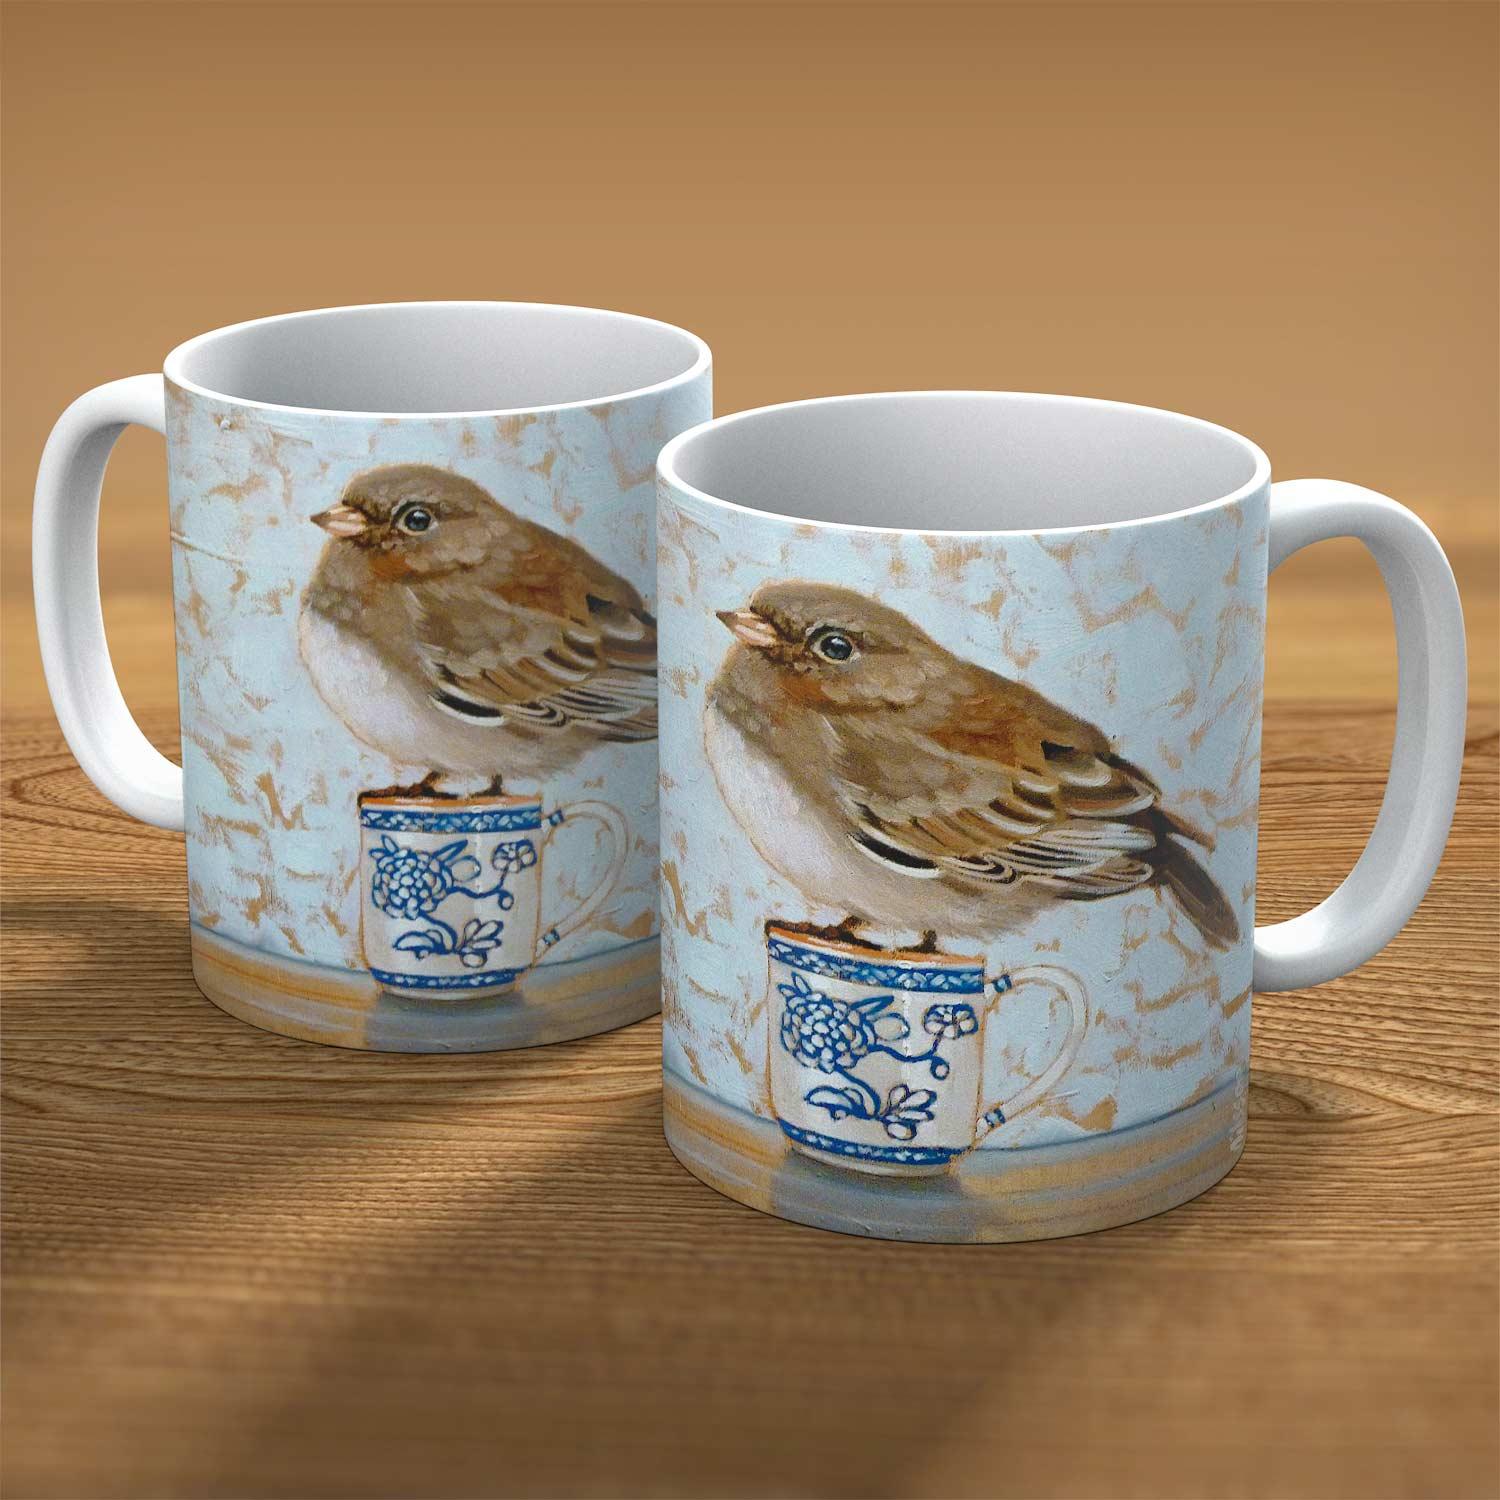 Junco on Teacup Mug from an original painting by artist Ingrid Nilsson